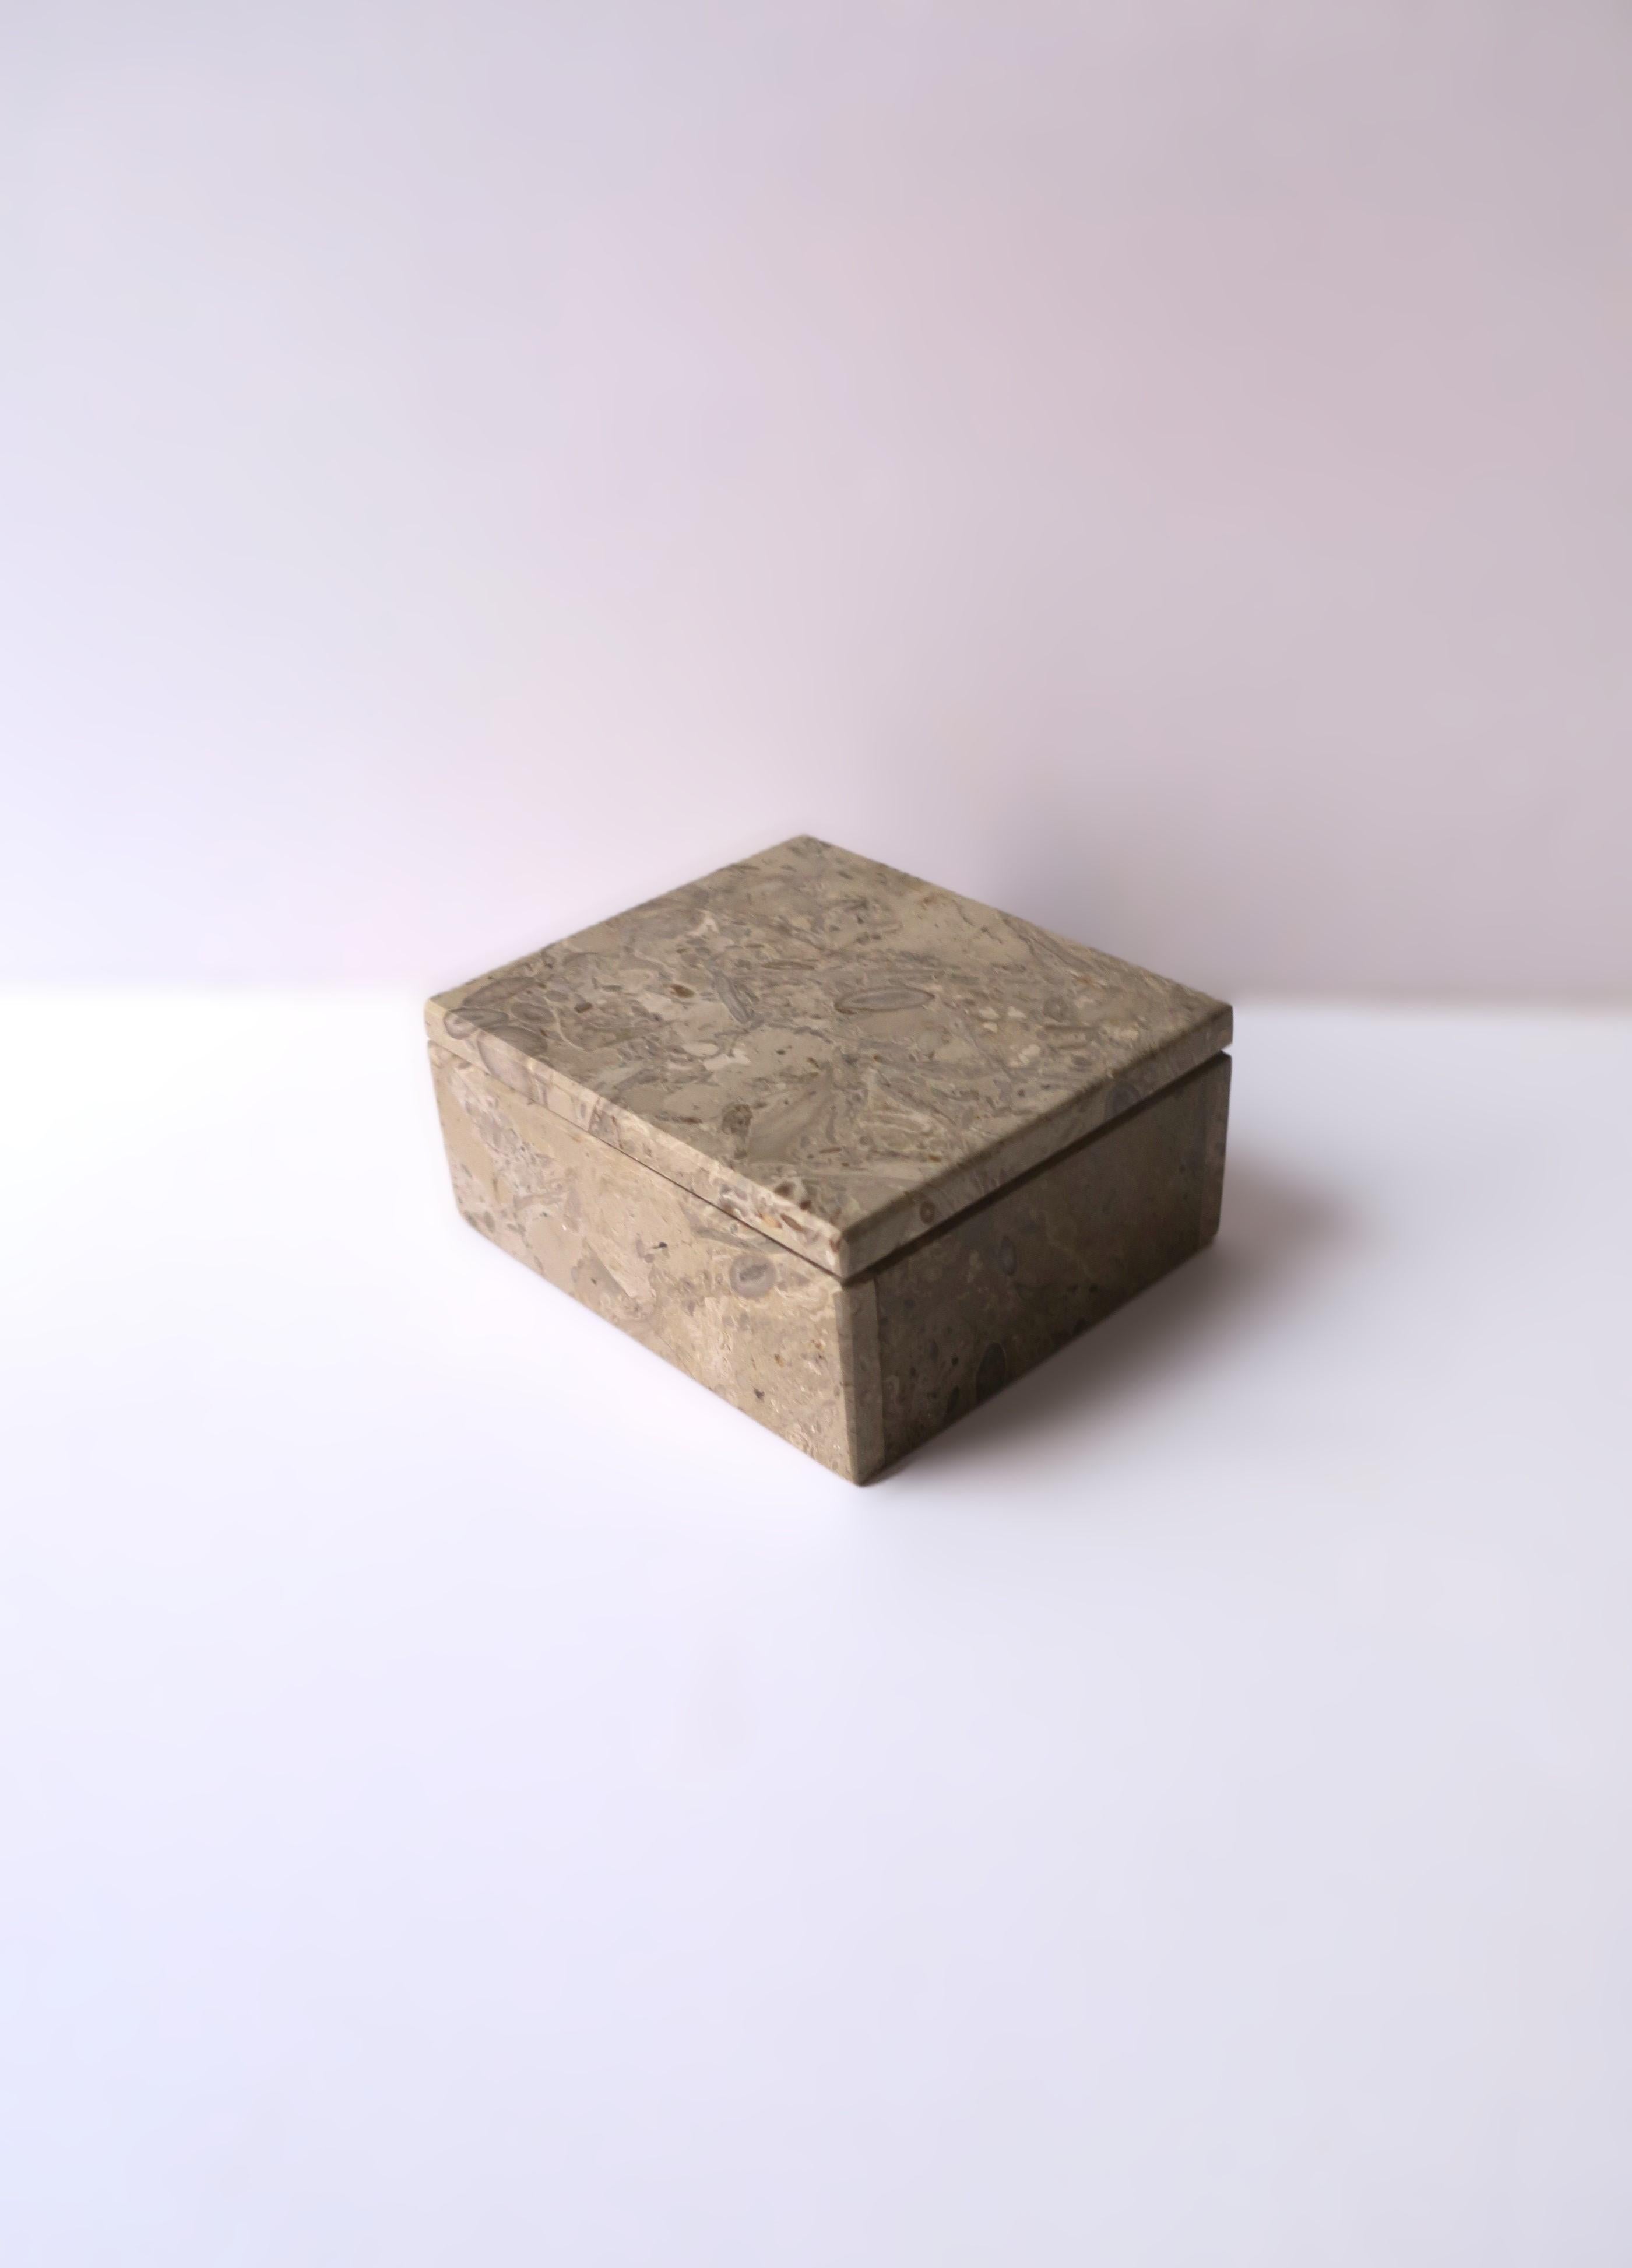 A neutral hue stone box, jewelry or decorative, in the Modern or Minimalist styles, circa late-20th century. A great piece to hold jewelry (demonstrated) or other small items on a desk, vanity, nightstand, walk-in-closet, etc. Very good condition as